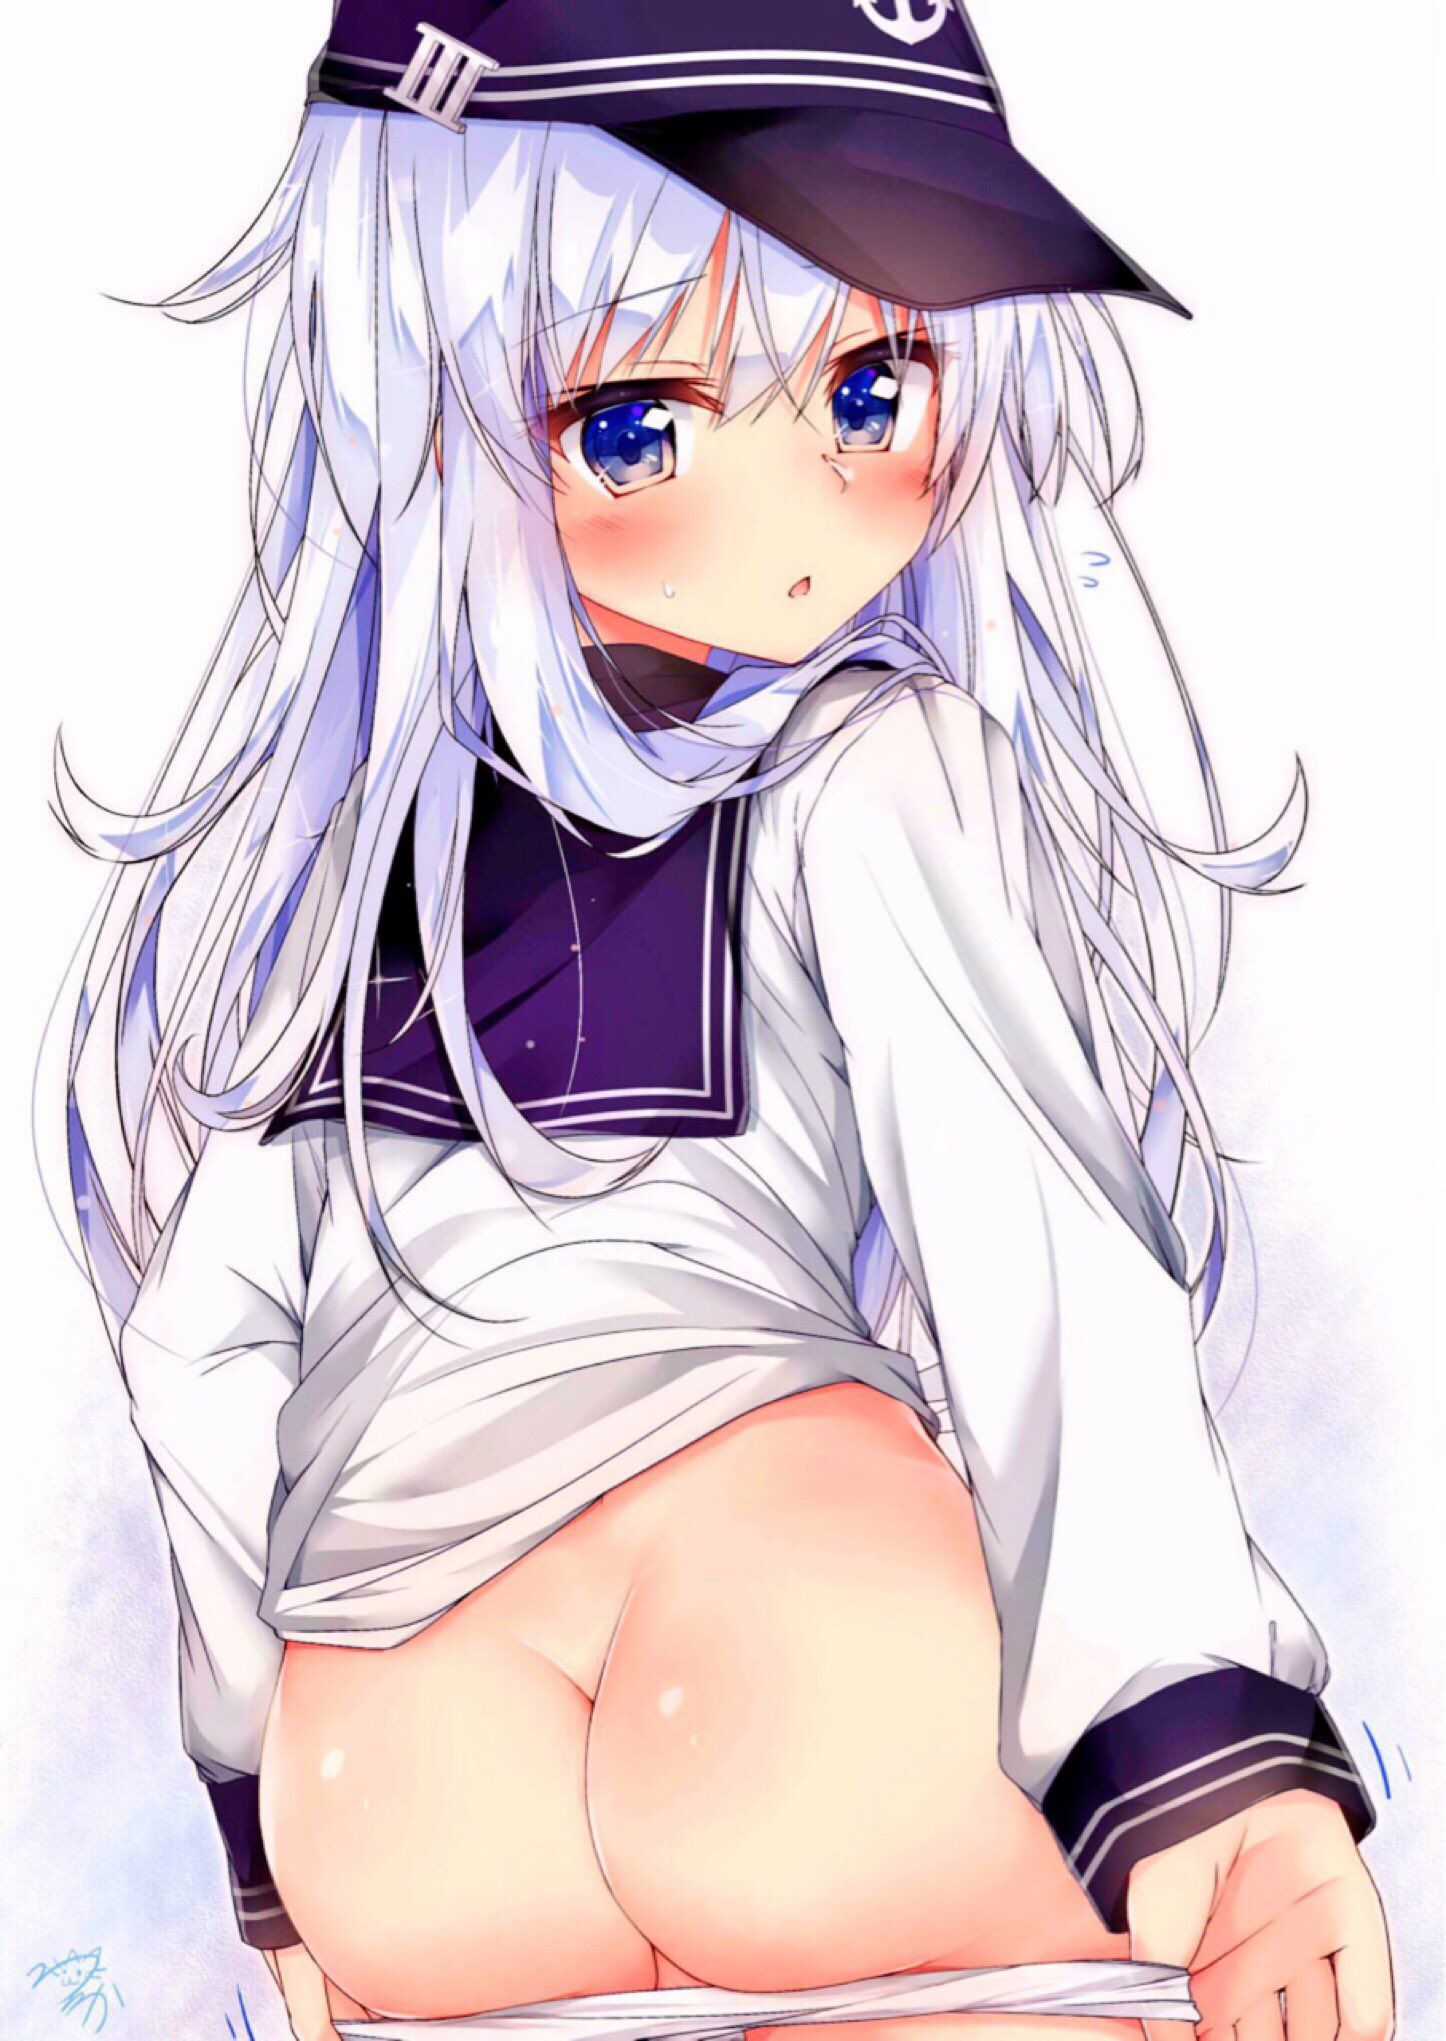 It is underwear second image スレ [about to wear it] during the putting on and taking off 11 [about to take it off] 18